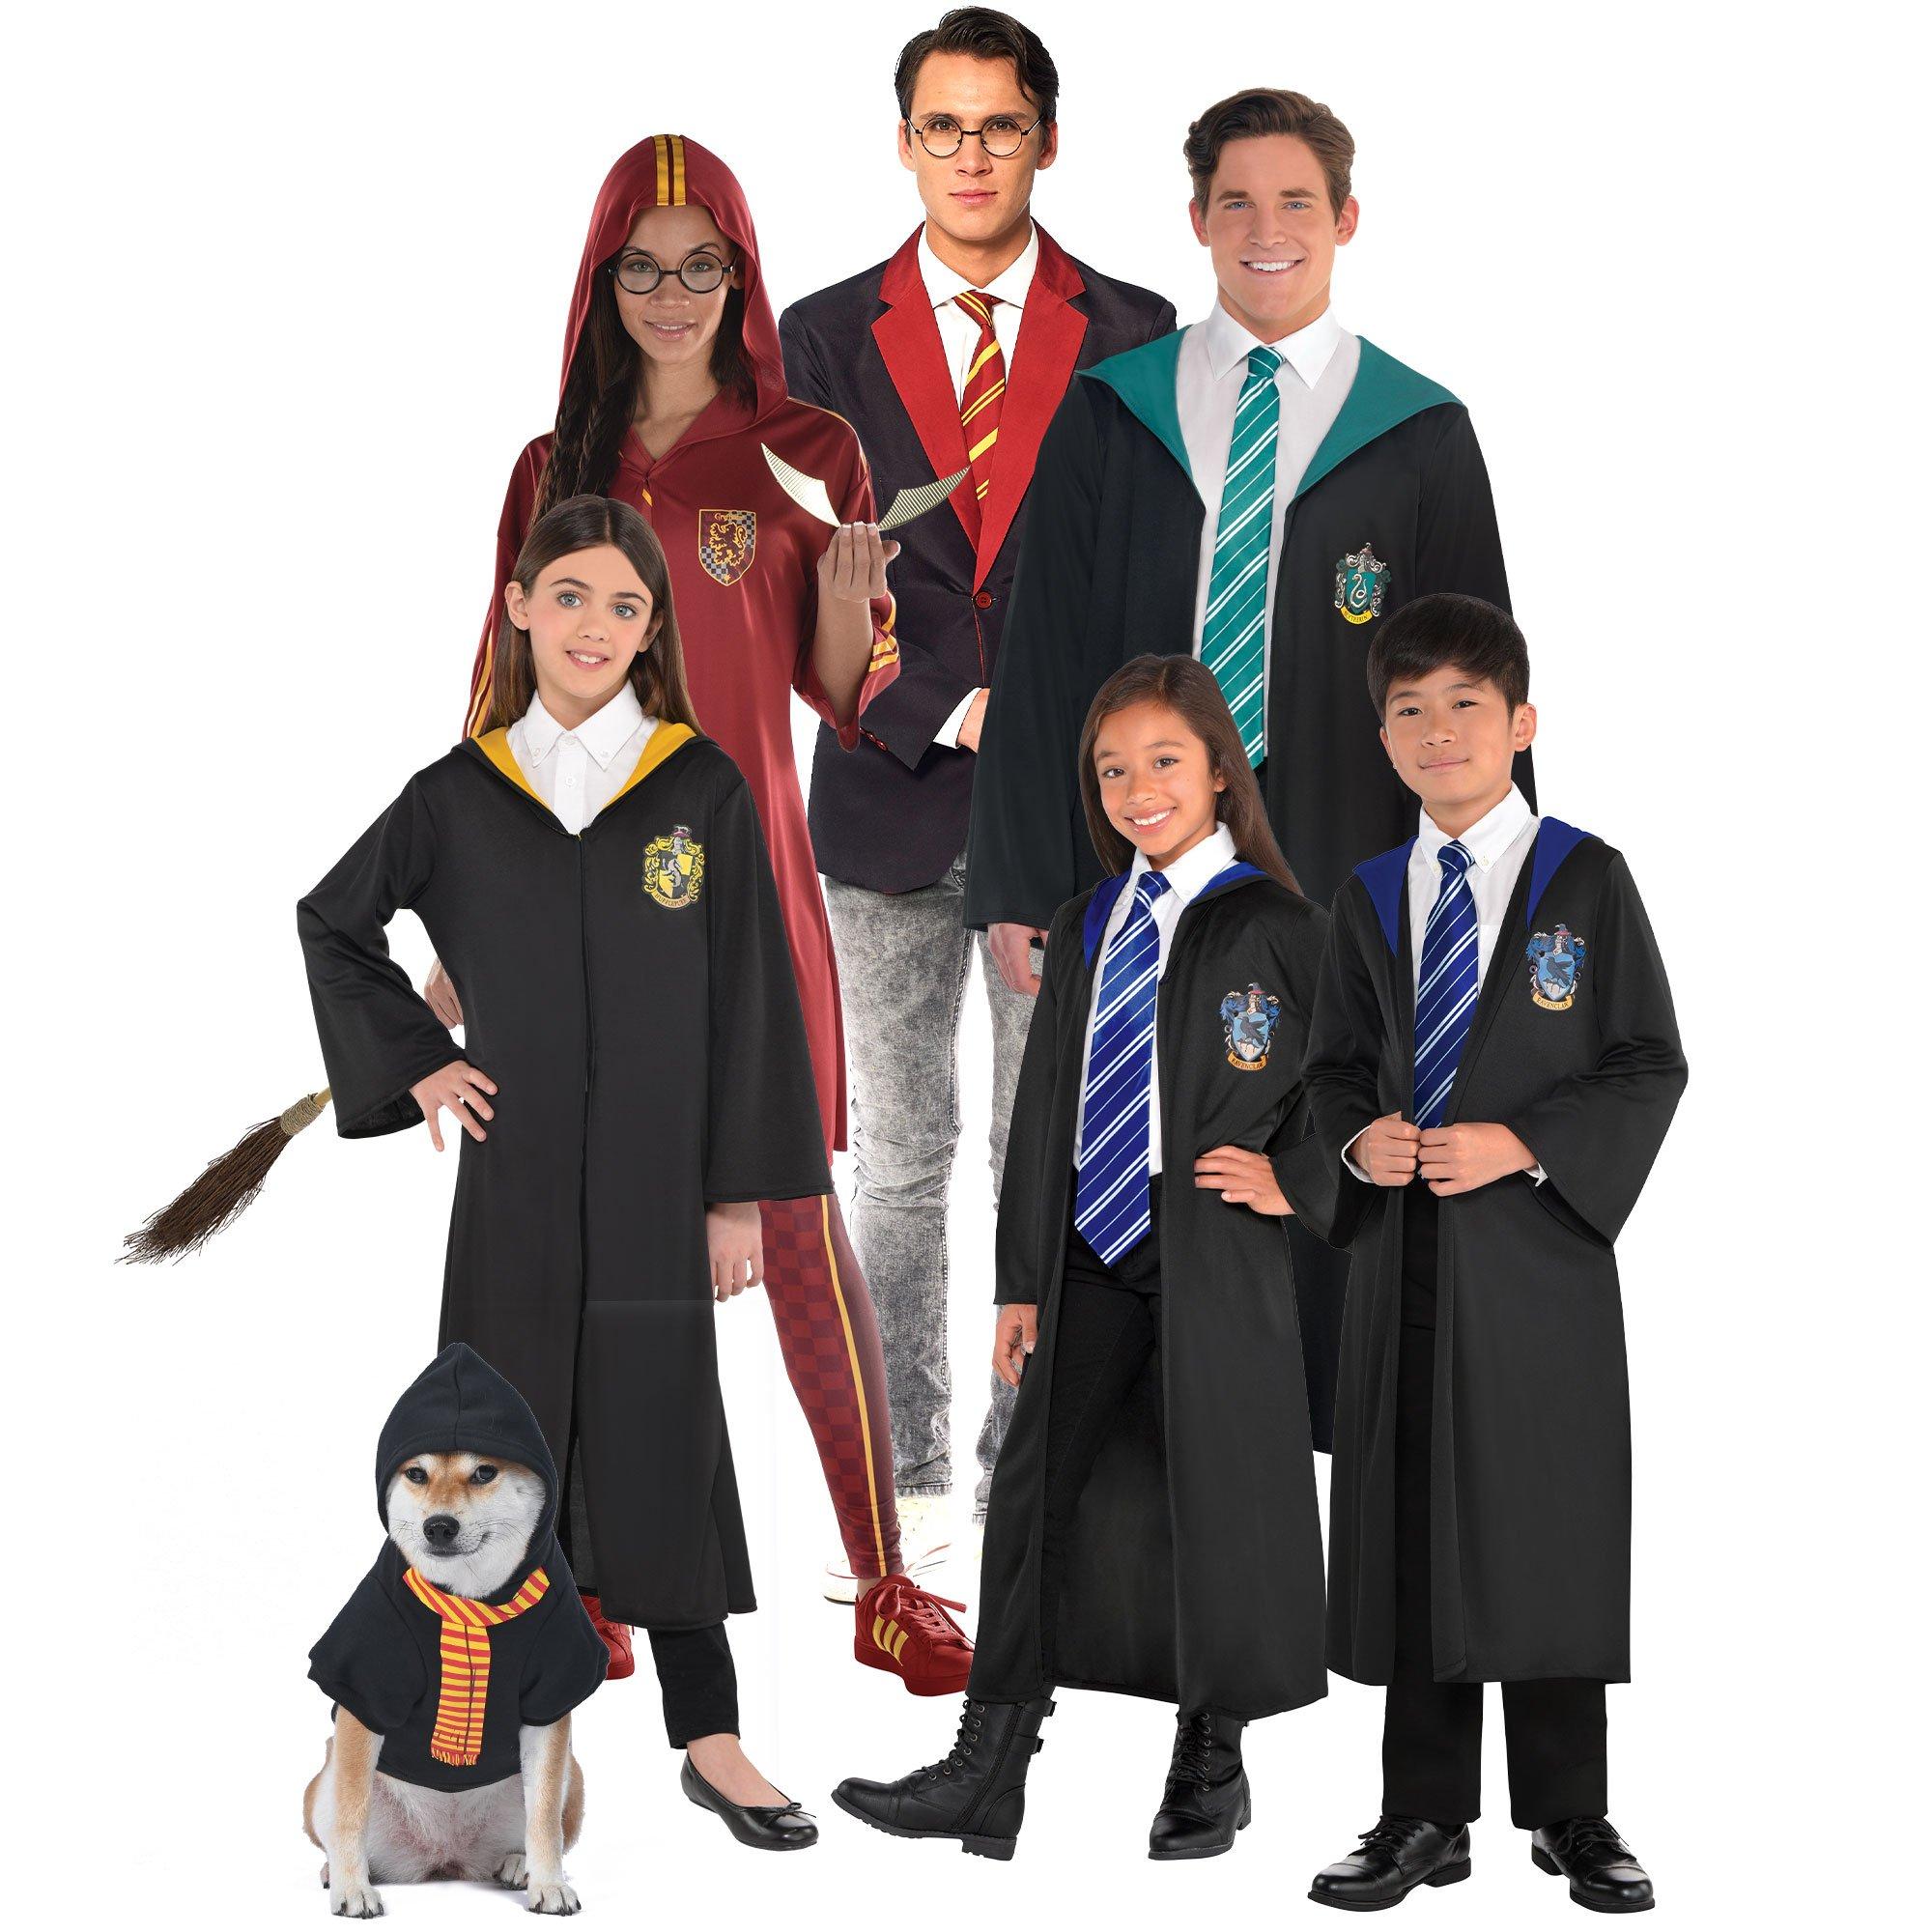 Harry Potter Costumes, Costume Ideas & Outfits | Party City